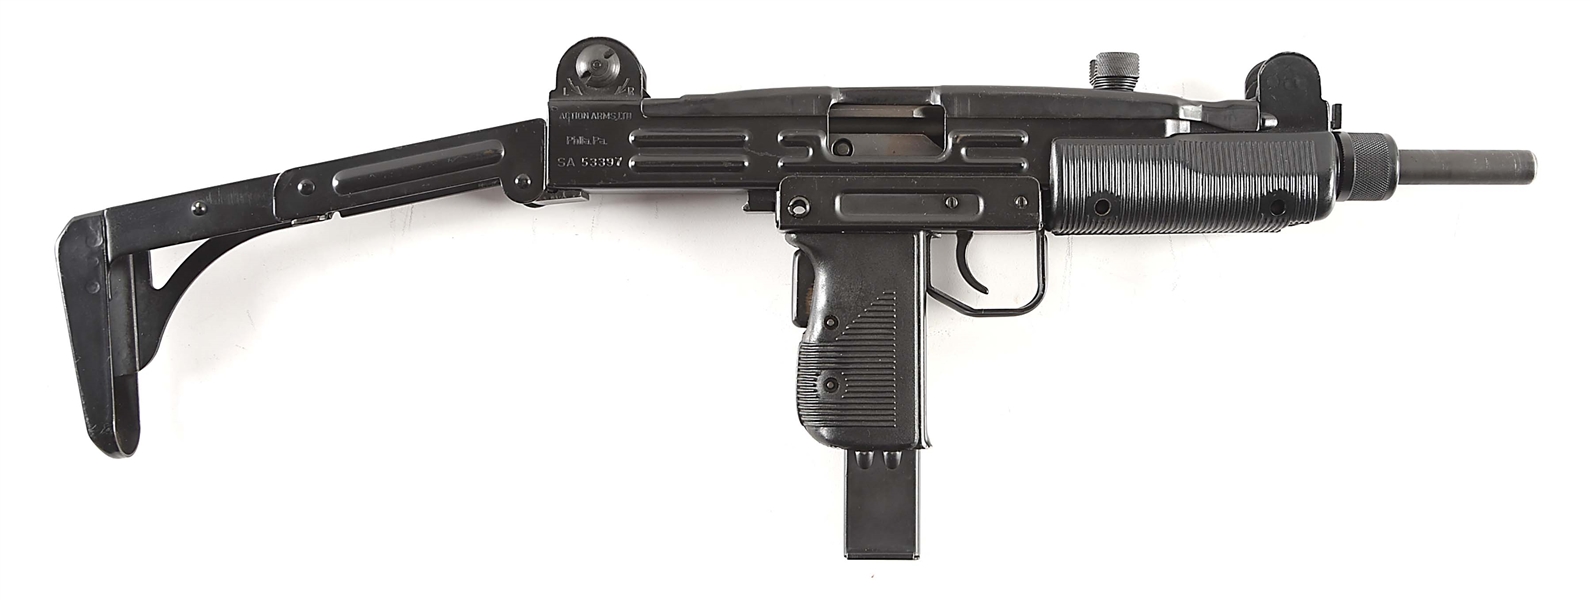 (N) ISRAEL MILITARY INDUSTRIES MODEL B UZI SUBMACHINE GUN IMPORTED BY ACTION ARMS (FULLY TRANSFERABLE).